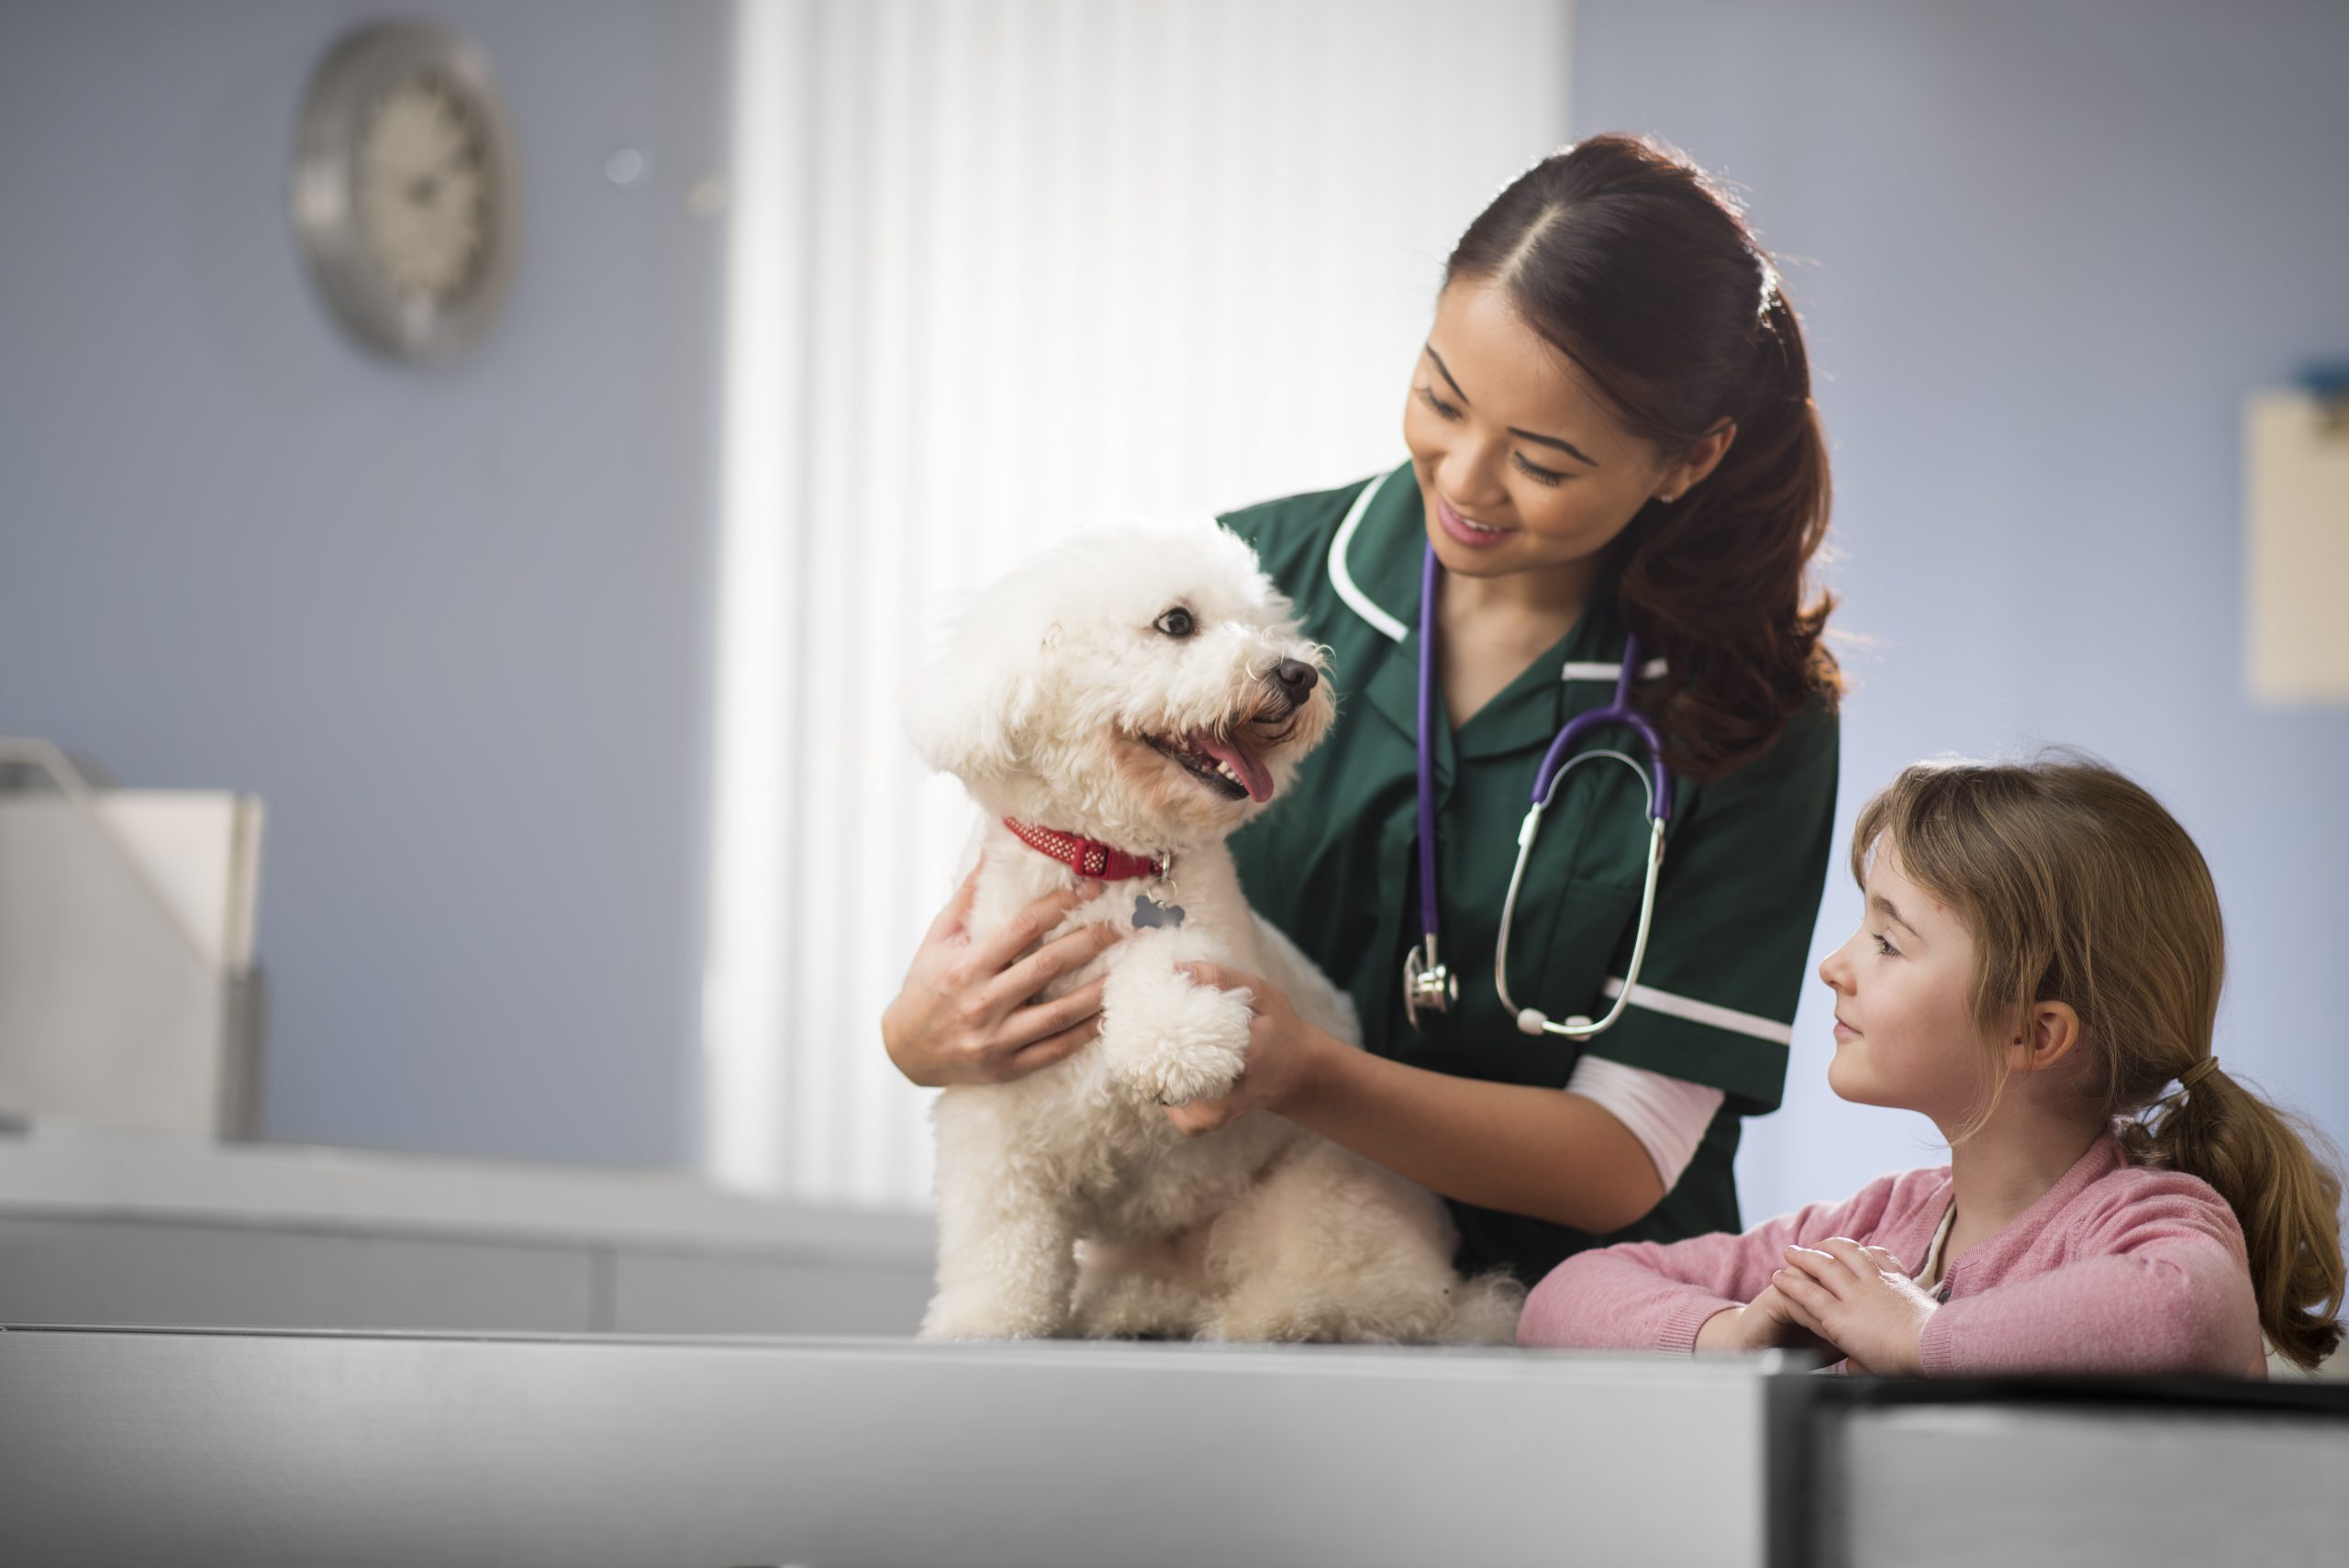 a little girl watches as her bichon frise is checked over at the examination table of an animal hospital . The female vet is looking at the dog's paw and explaining to the little girl that the pet will be fine.